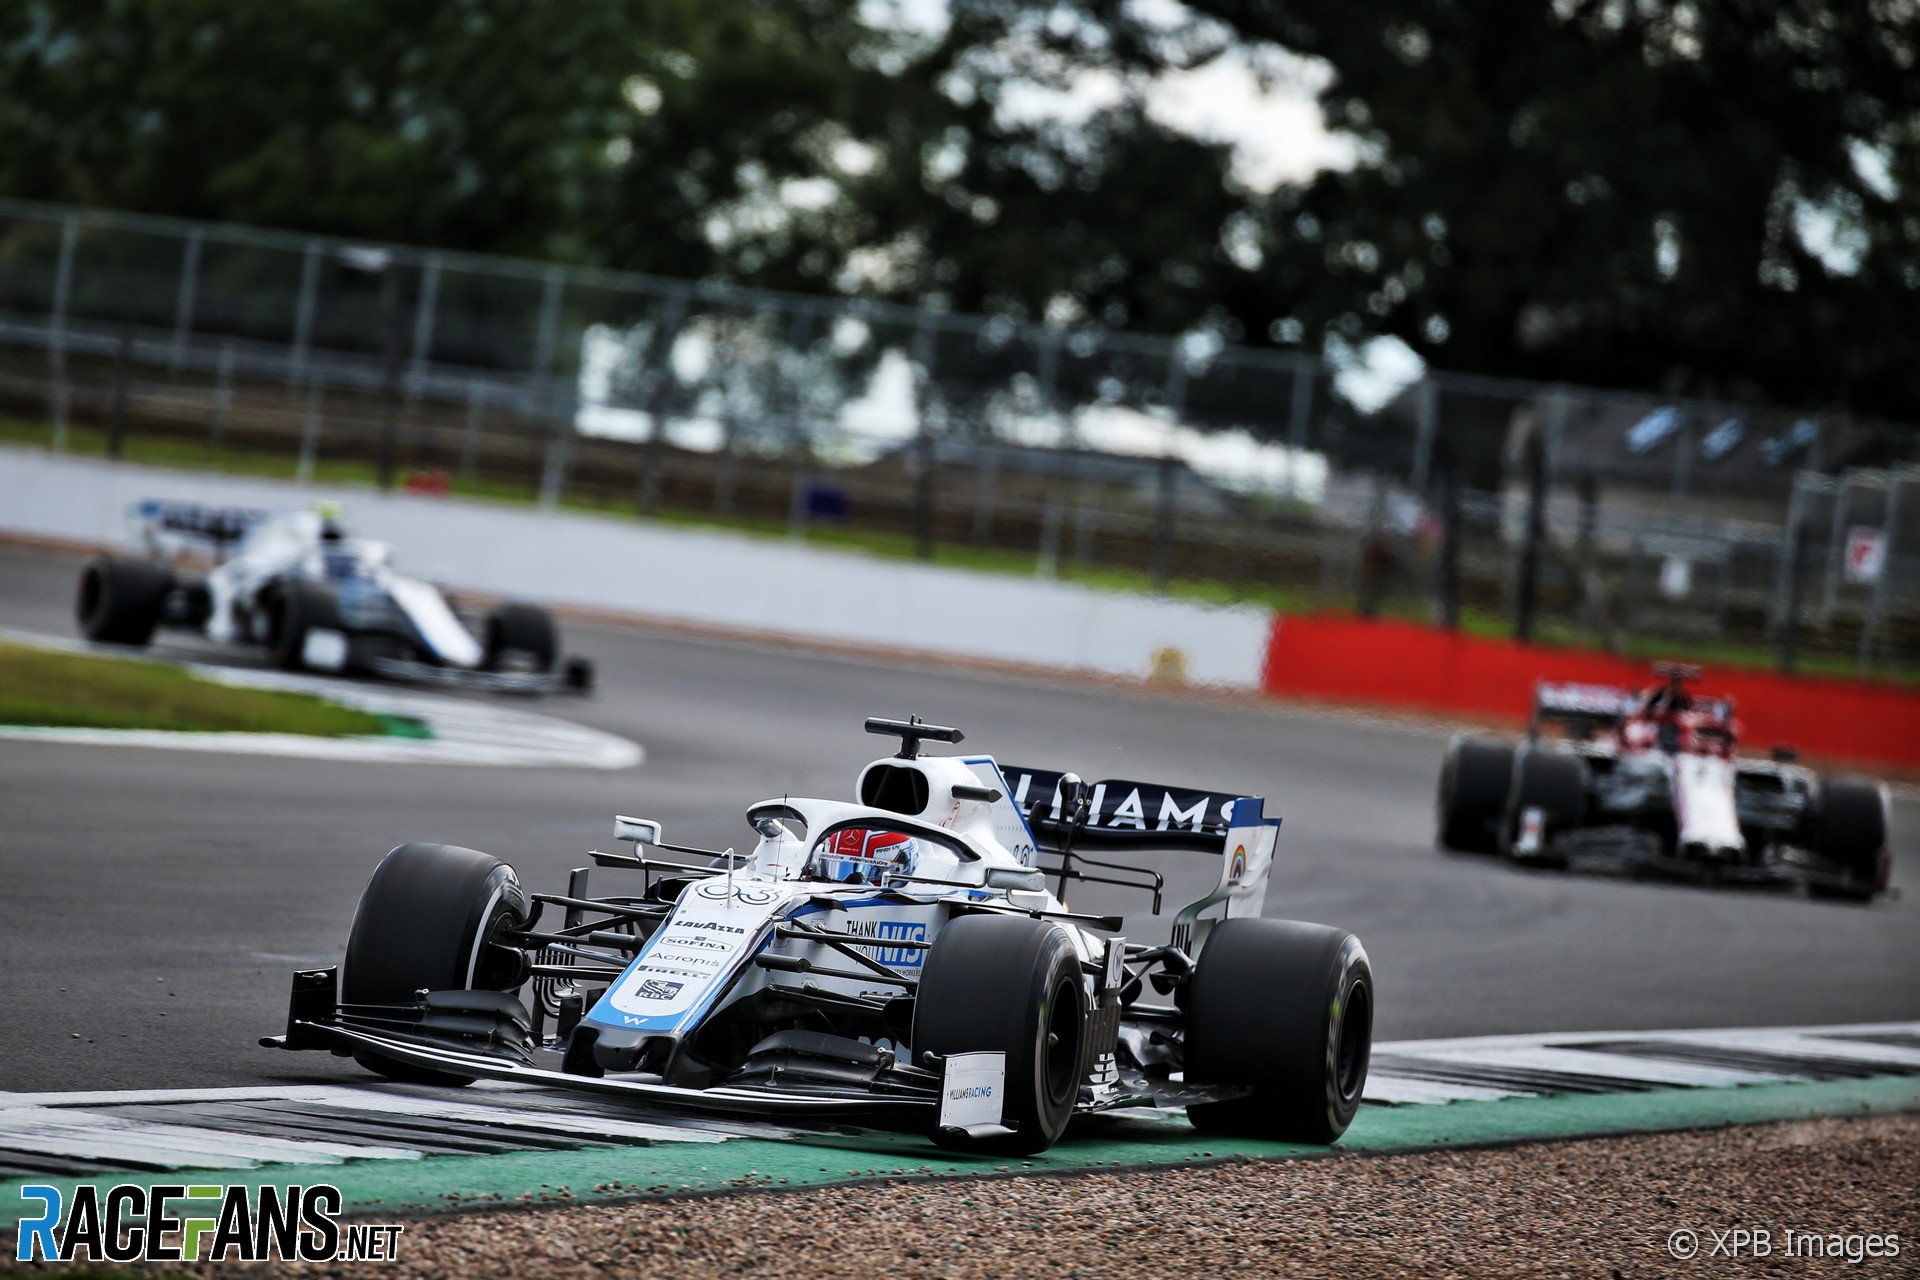 George Russell, Williams, Silverstone, 2020